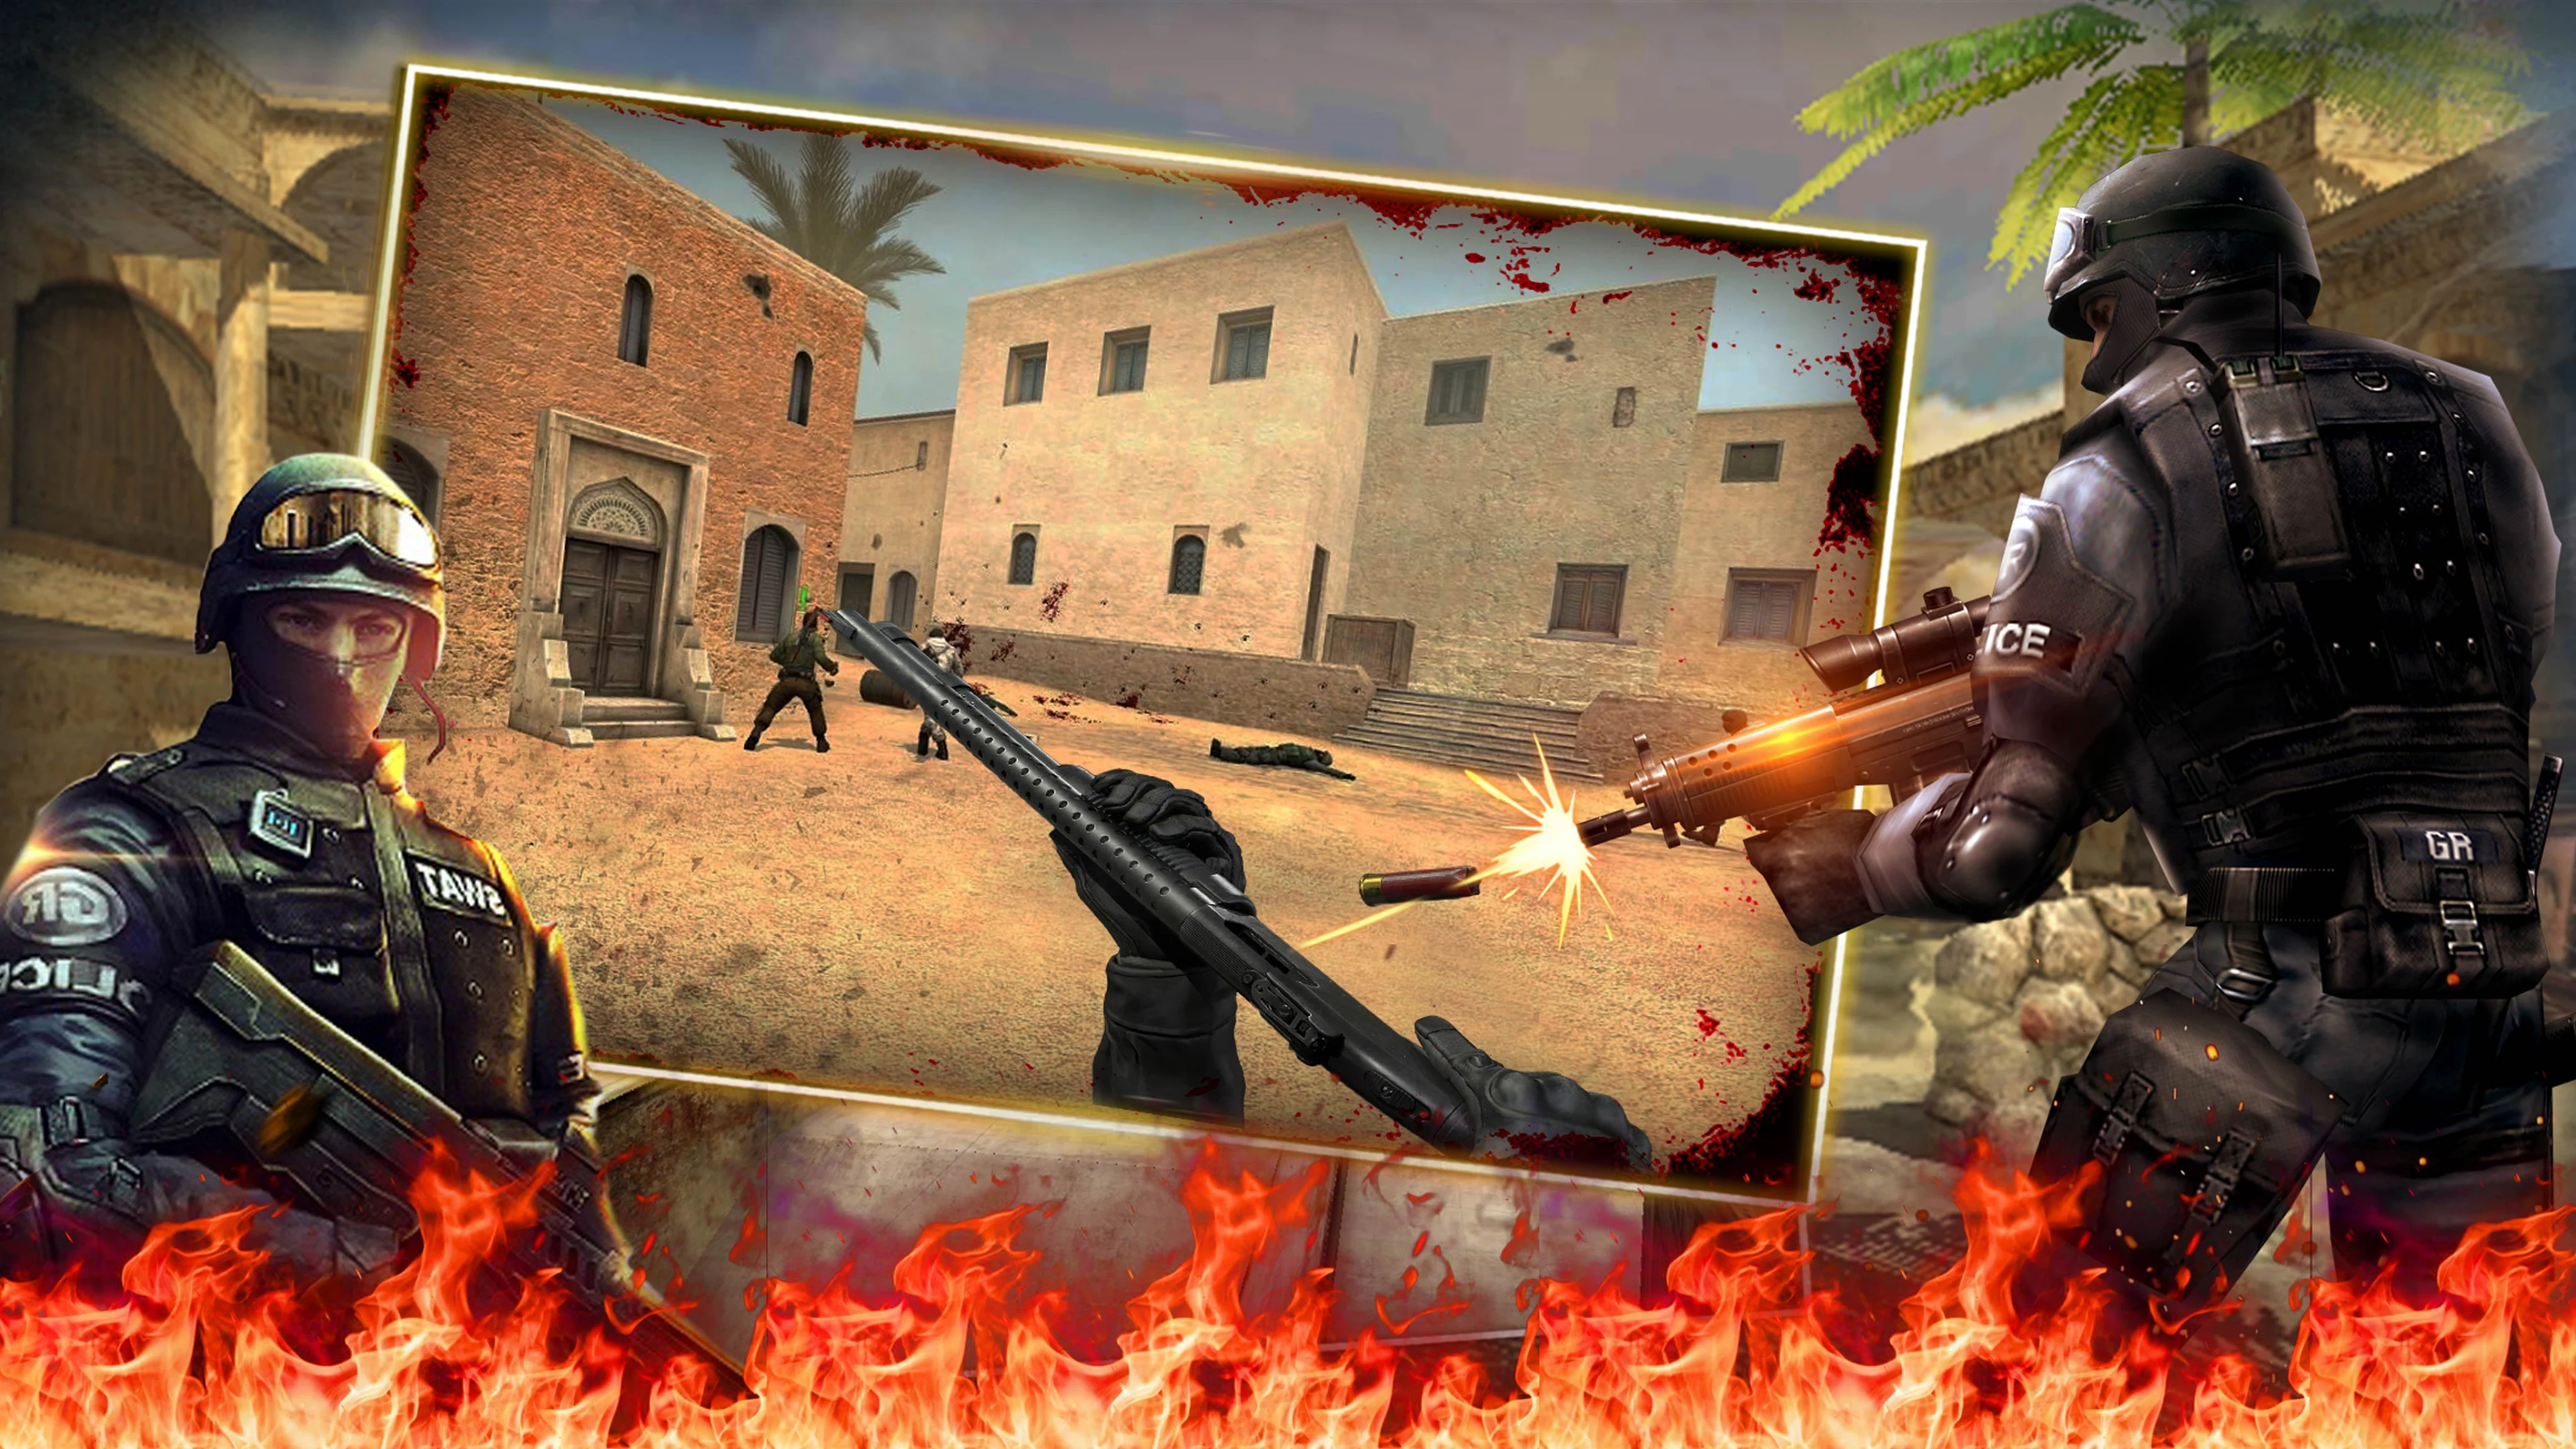 Android Apps by Fun Shooting Games - FPS on Google Play